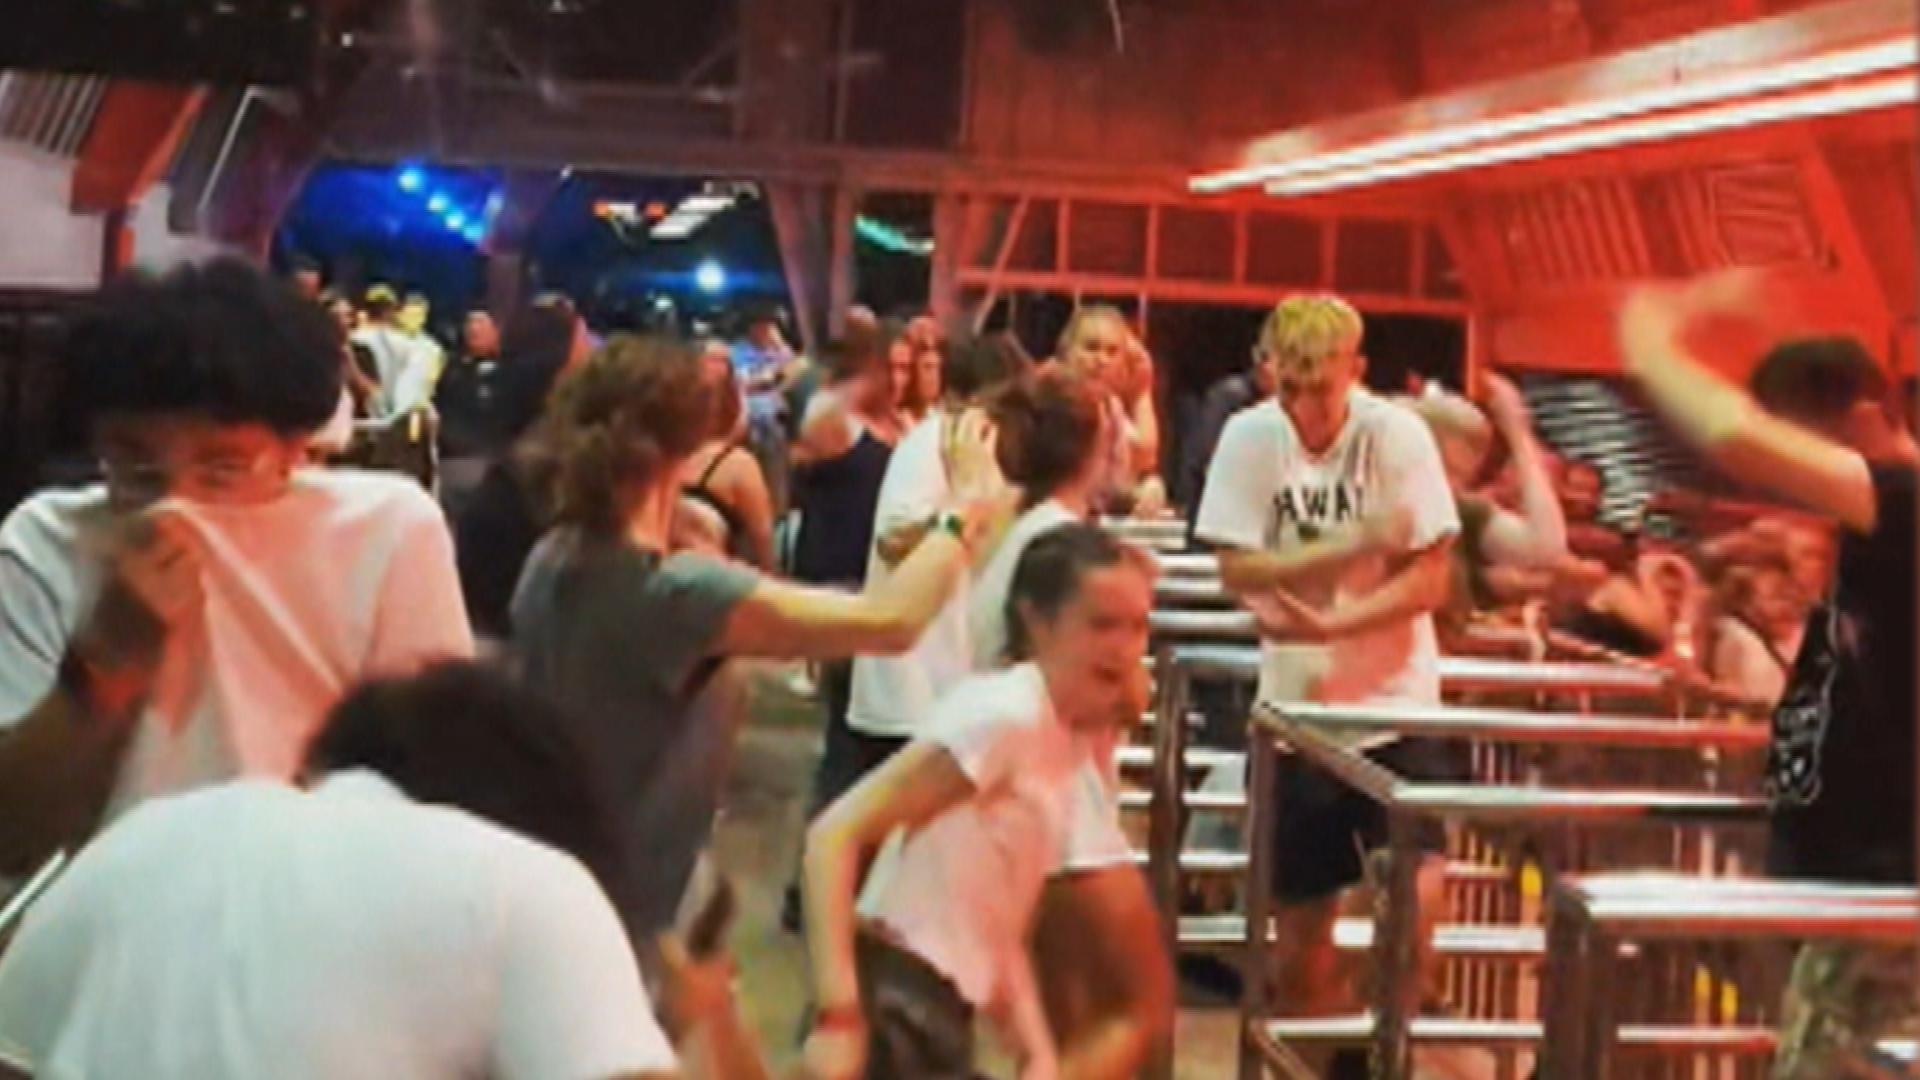 Ohio Roller Coaster Riders Get Swarmed by Mayfly Invasion 